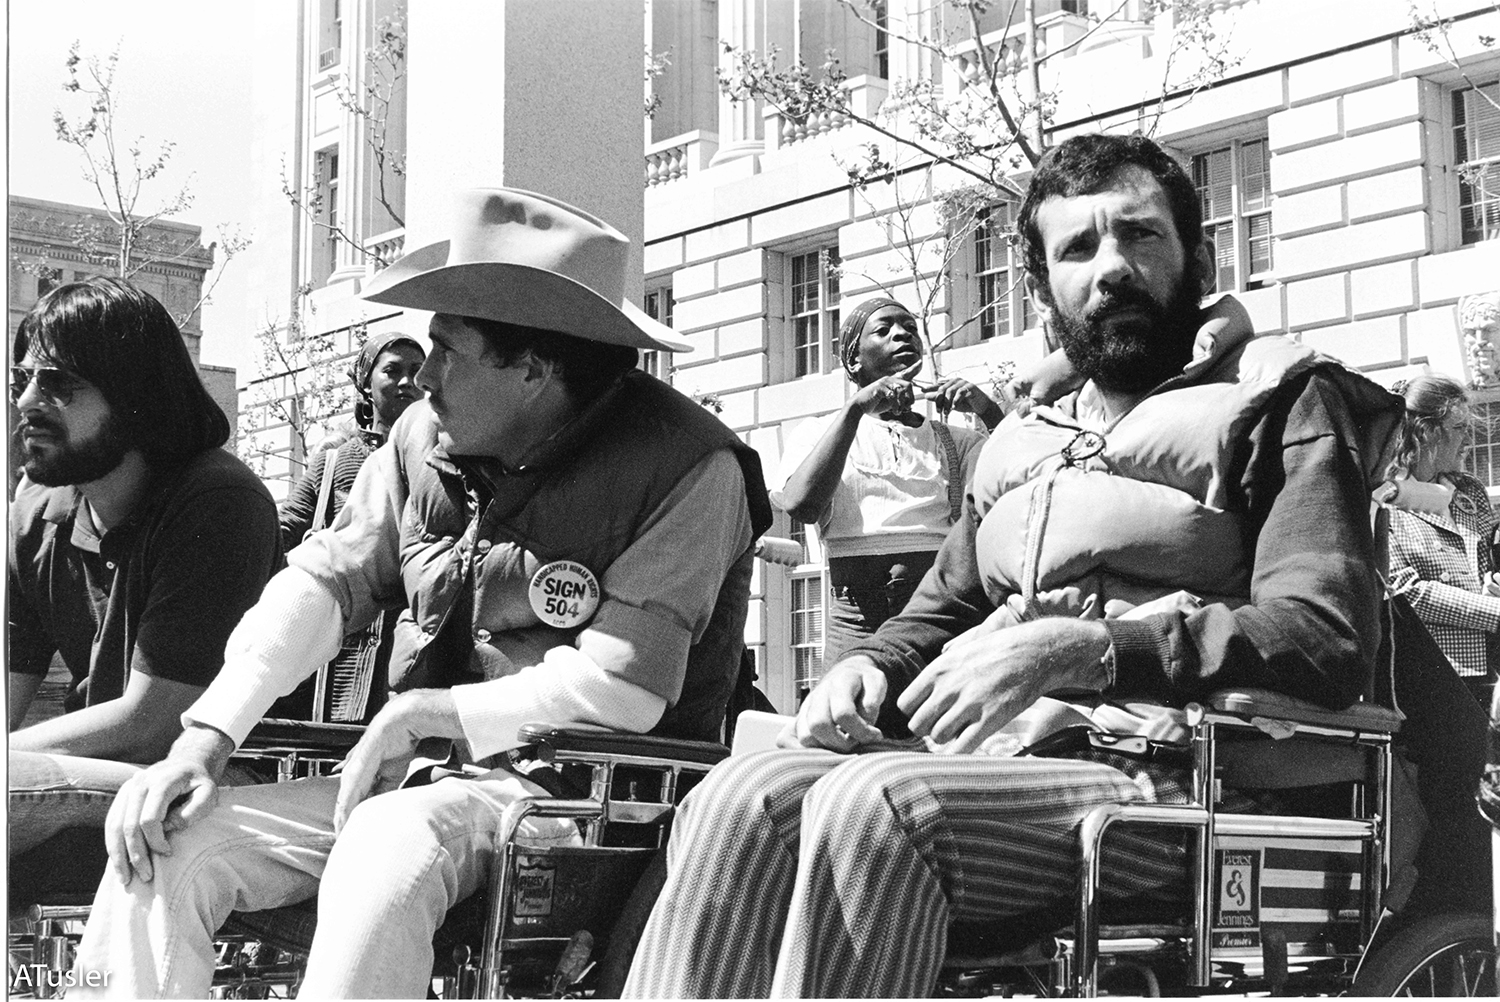 Black and white photo of two men in manual wheelchairs, the exterior of the San Francisco federal building in the background